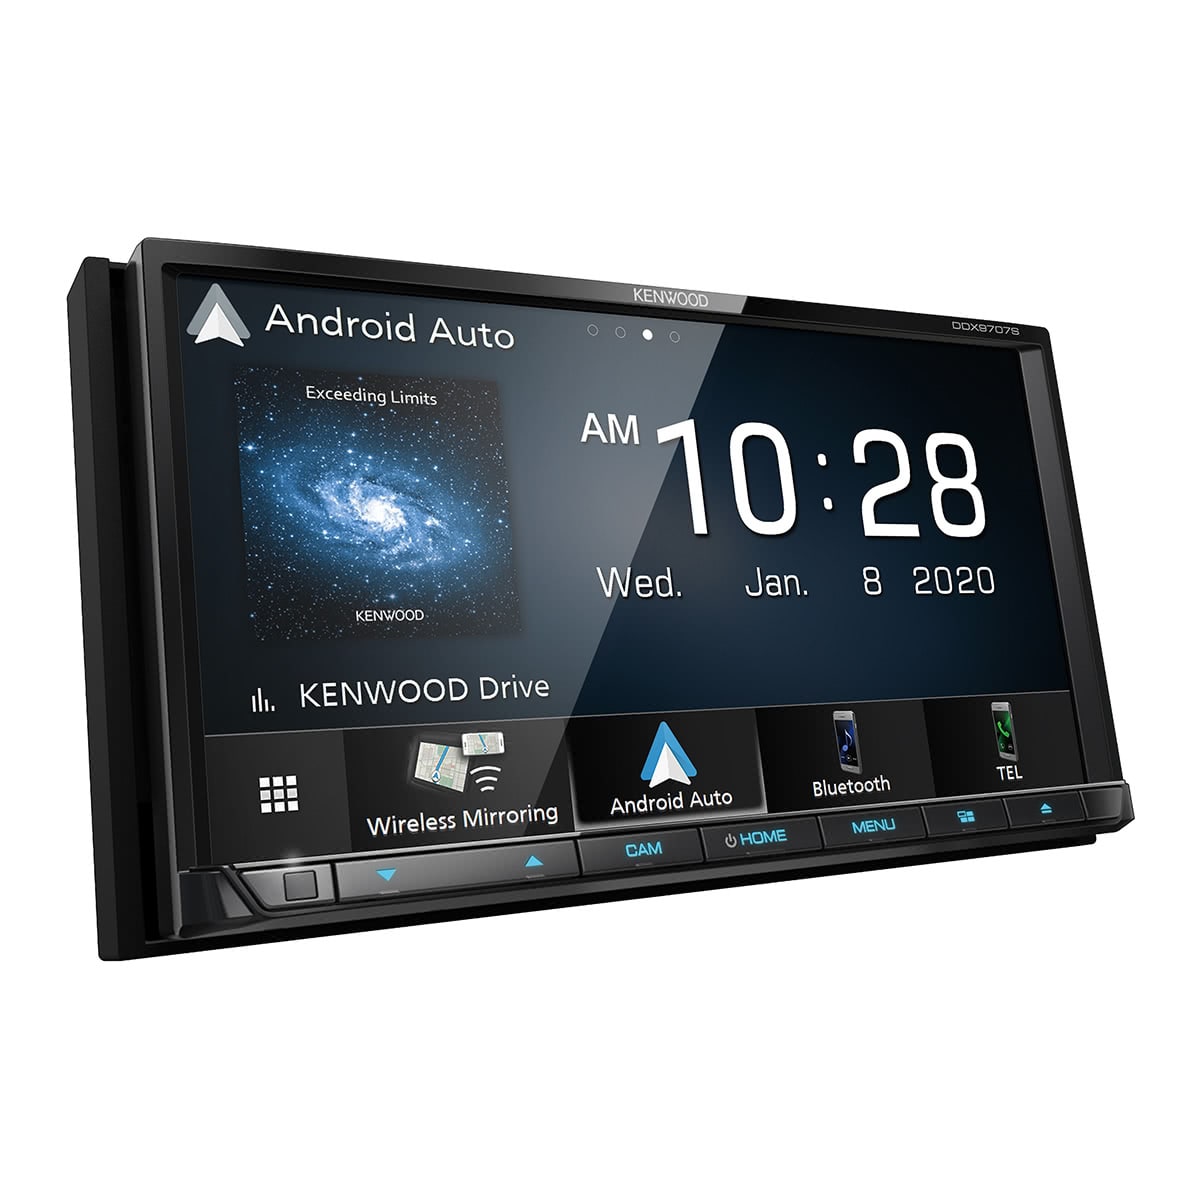 Kenwood DDX9707S Stereo Receiver w/ Apple CarPlay and Android Auto